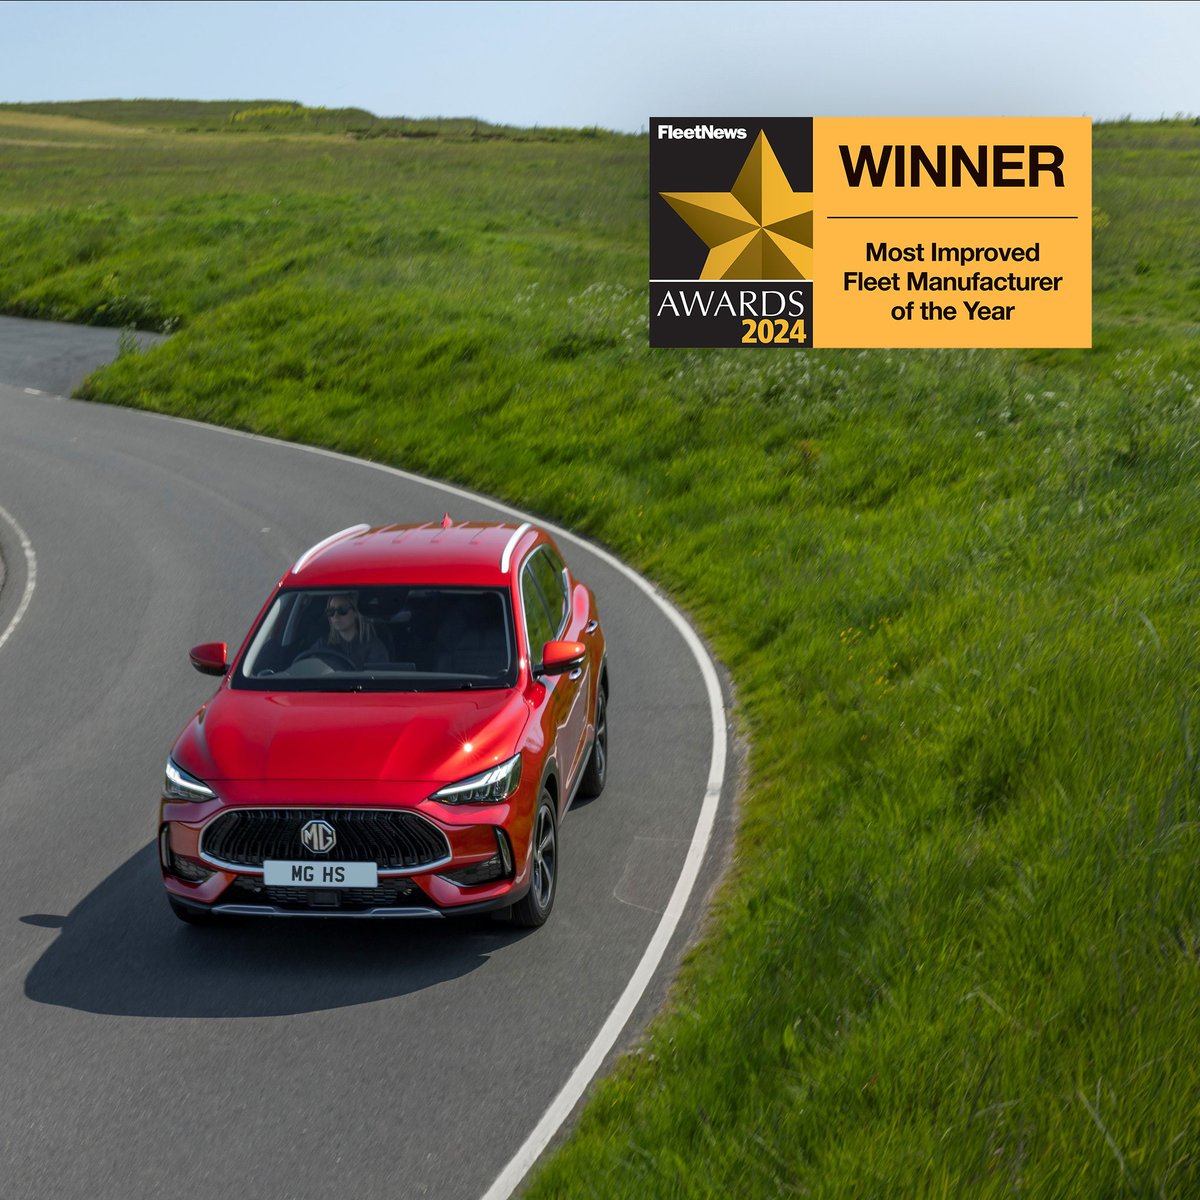 Honoured to be recognised as 'Most Improved Fleet Manufacturer of the Year' by @_FleetNews! A testament to our commitment to excellence and innovation. Thank you to all our customers and partners who have helped us on this journey. #MG #MGUK #MGMotor #MGMotorUK #FNAwards #Fleet